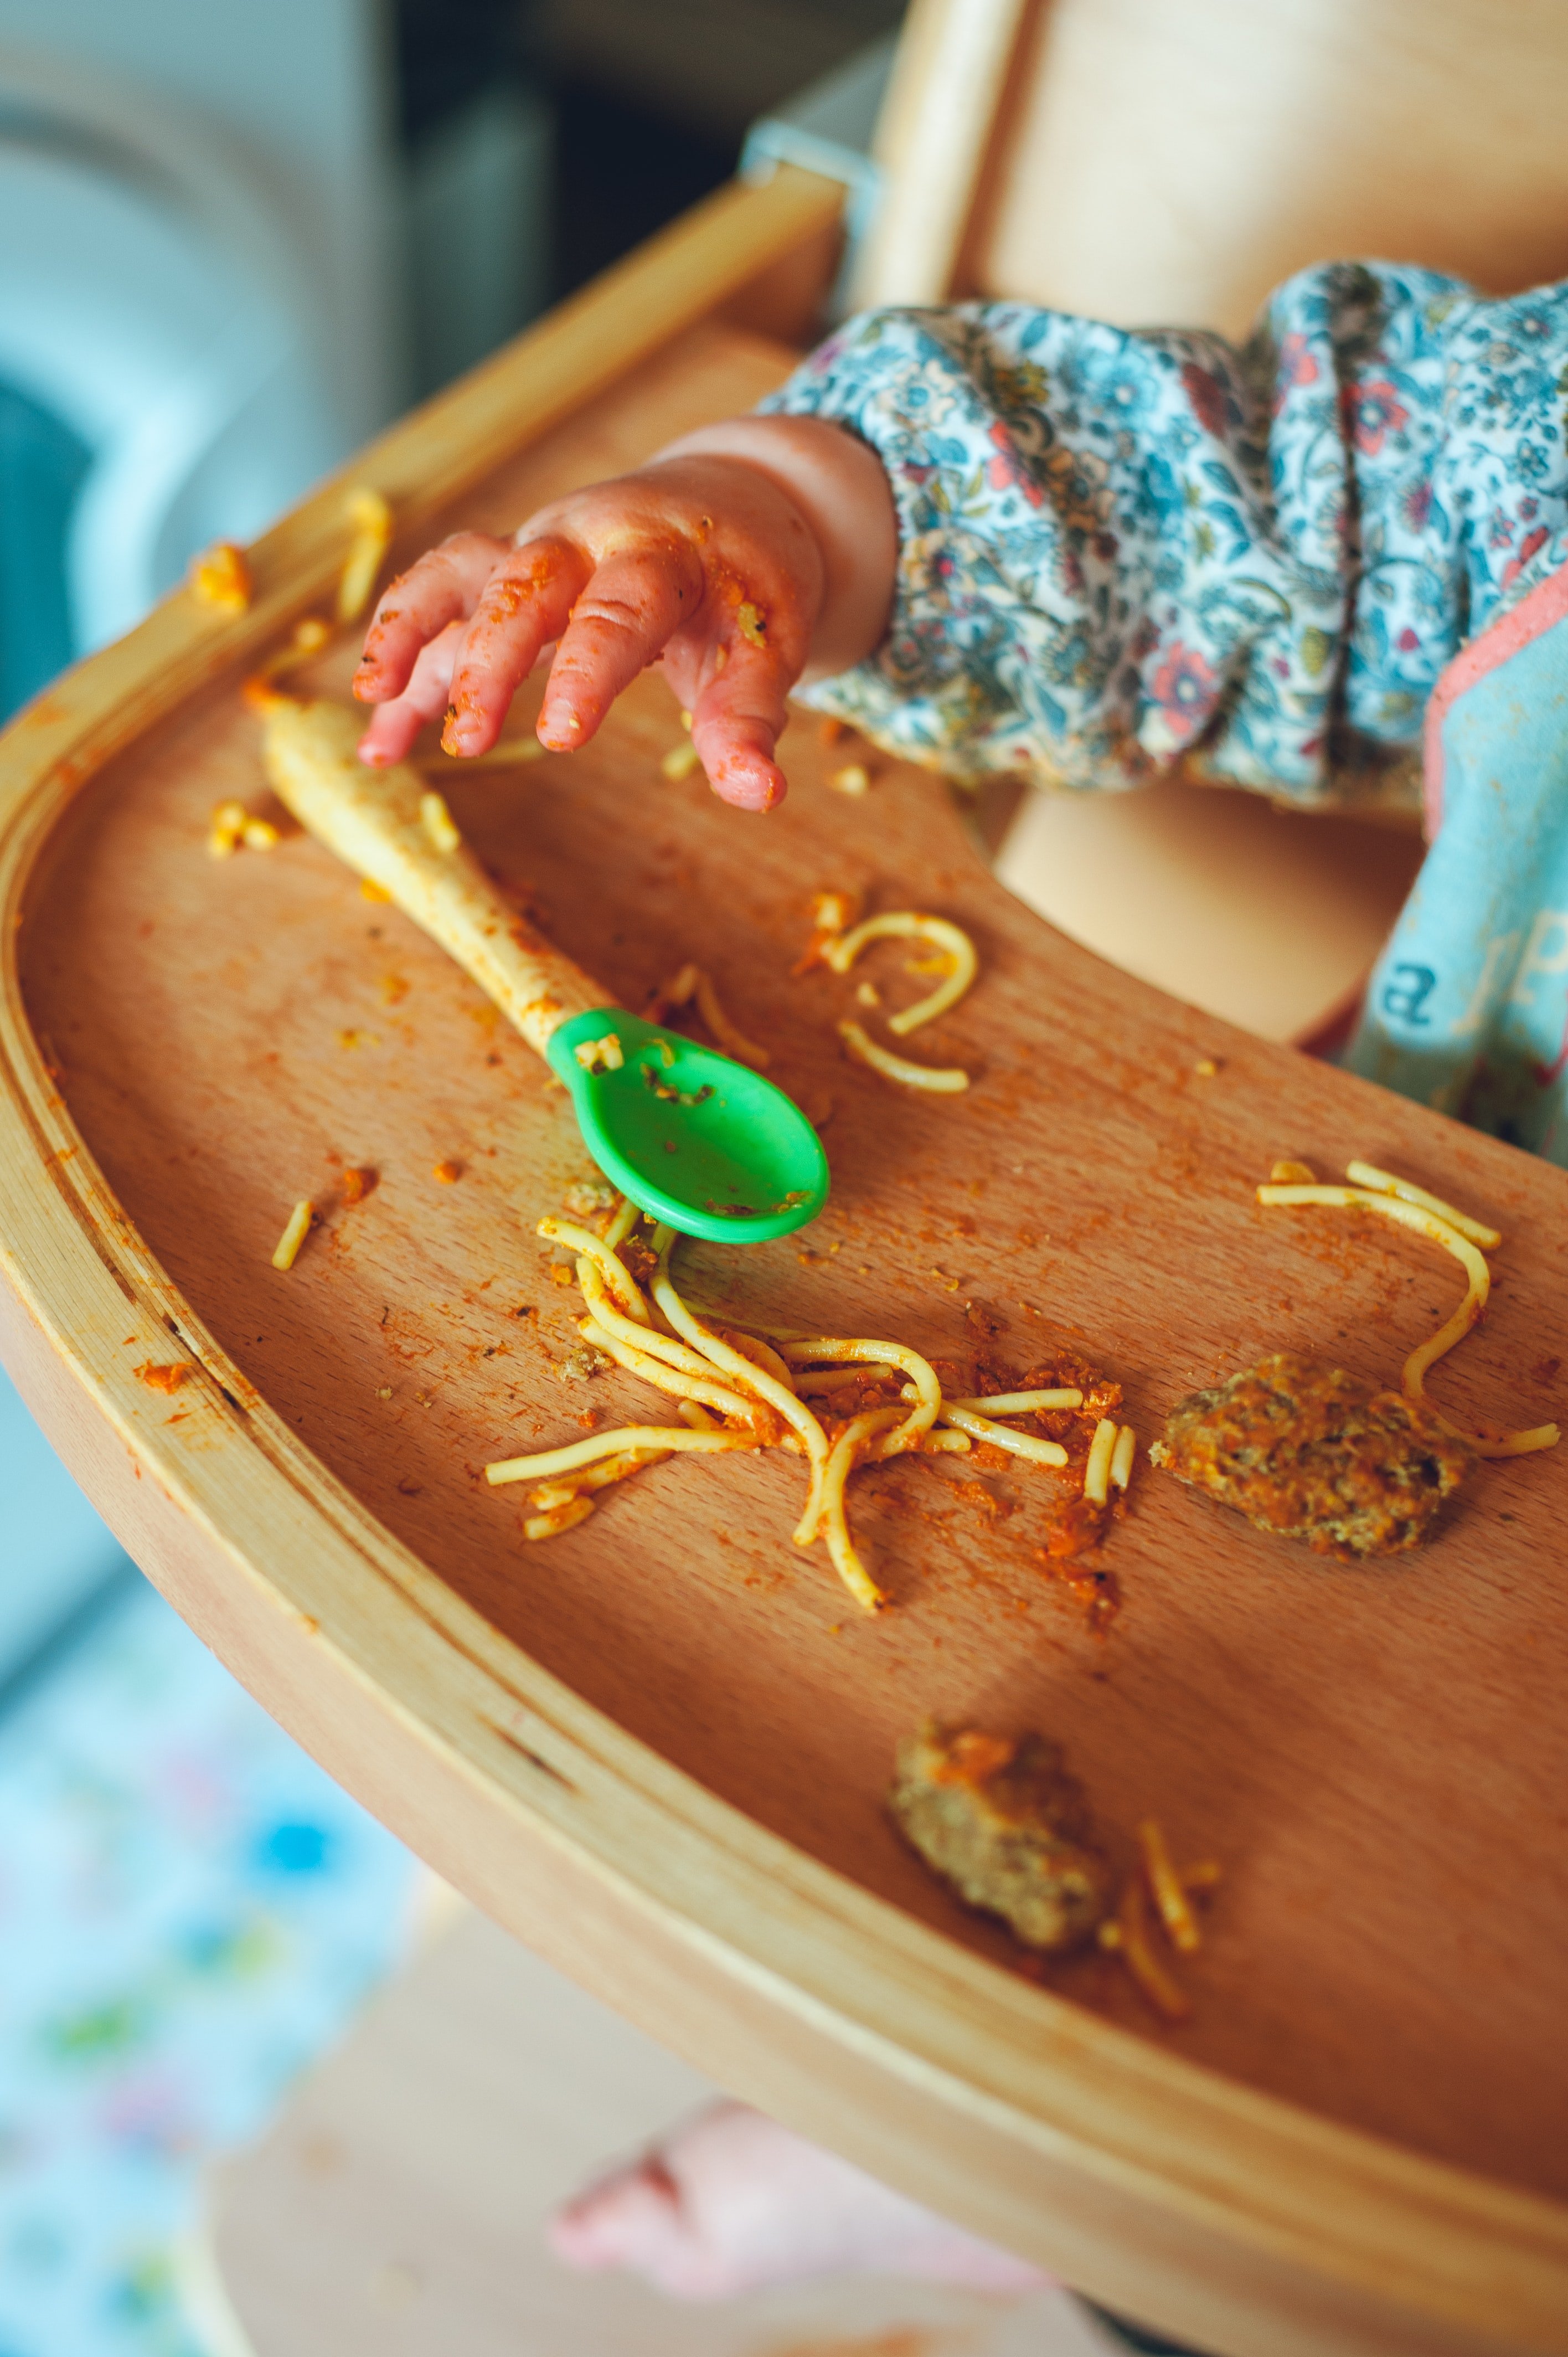 "'To protect and to serve' definitely includes serving spaghetti!" | Source: Unsplash